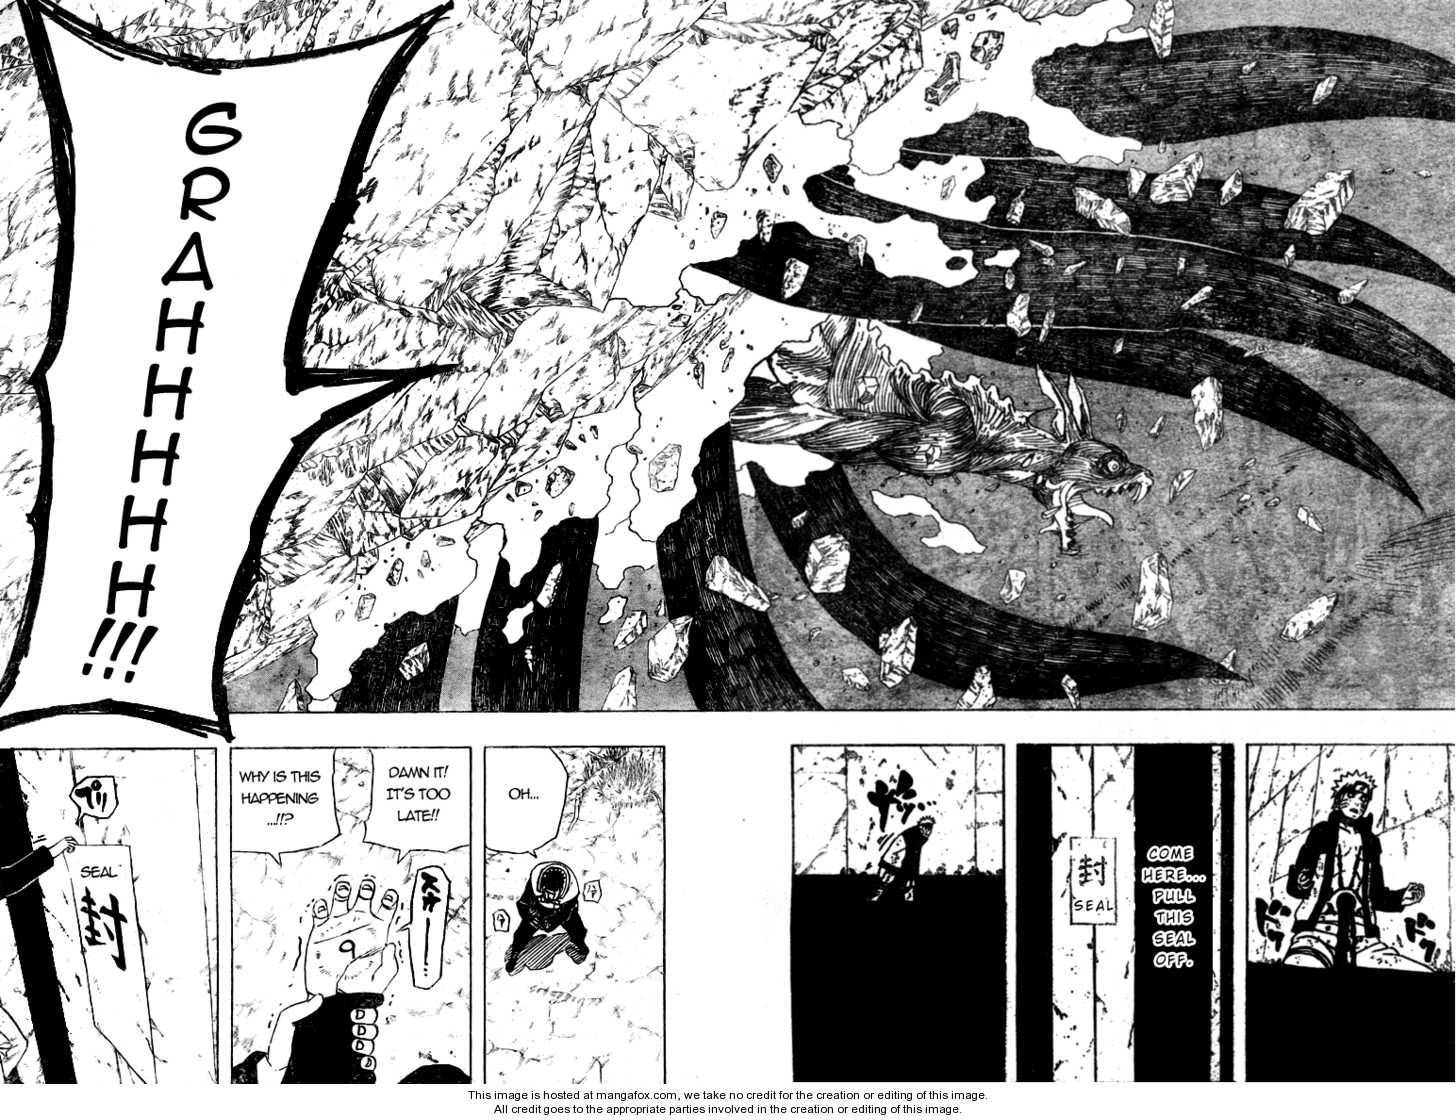 Naruto Manga's back with UNEXPECTED THINGS! - Page 4 4140616781d843b0f4a3172eb5b027c87d82b4b